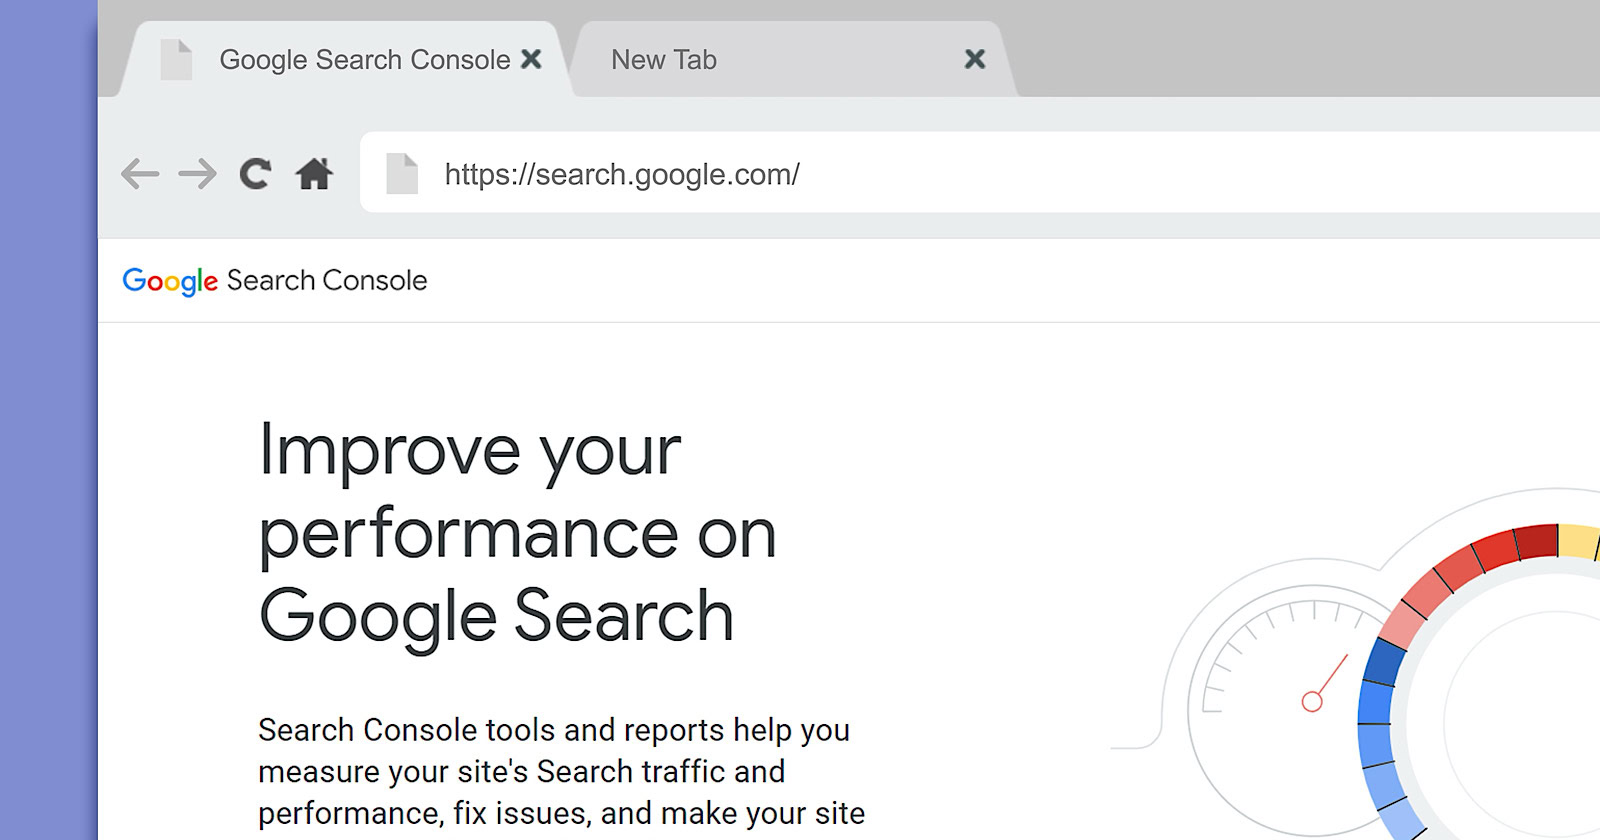 Screenshot of the Google Search Console homepage viewed on a web browser, displaying text "improve your performance on Google Search" and including a speedometer graphic.